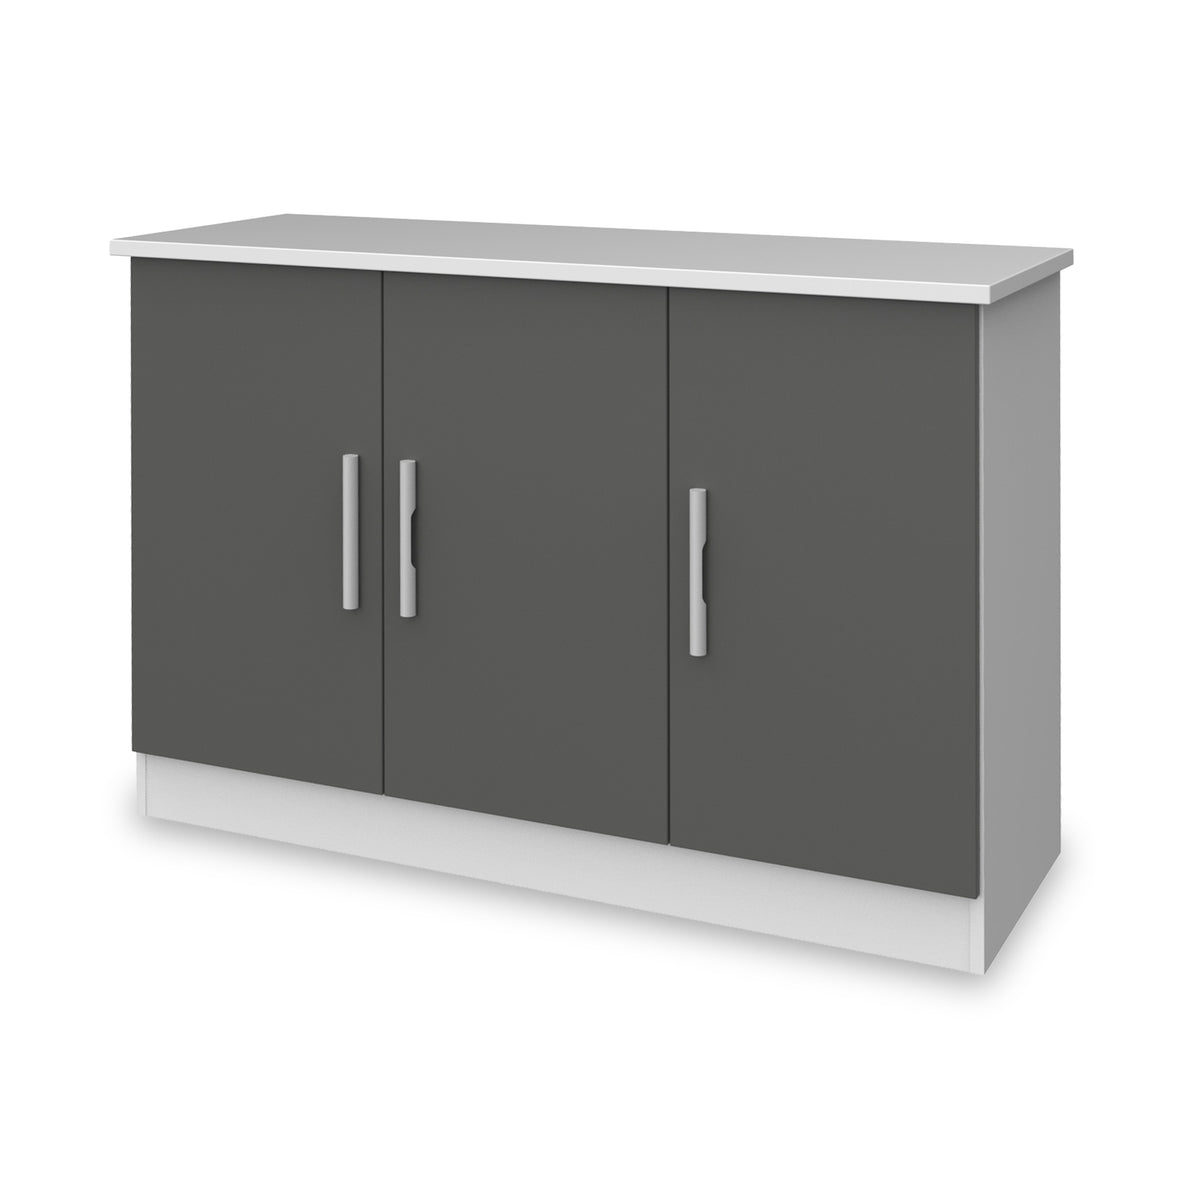 Blakely Grey and White 3 Door Sideboard from Roseland Furniture